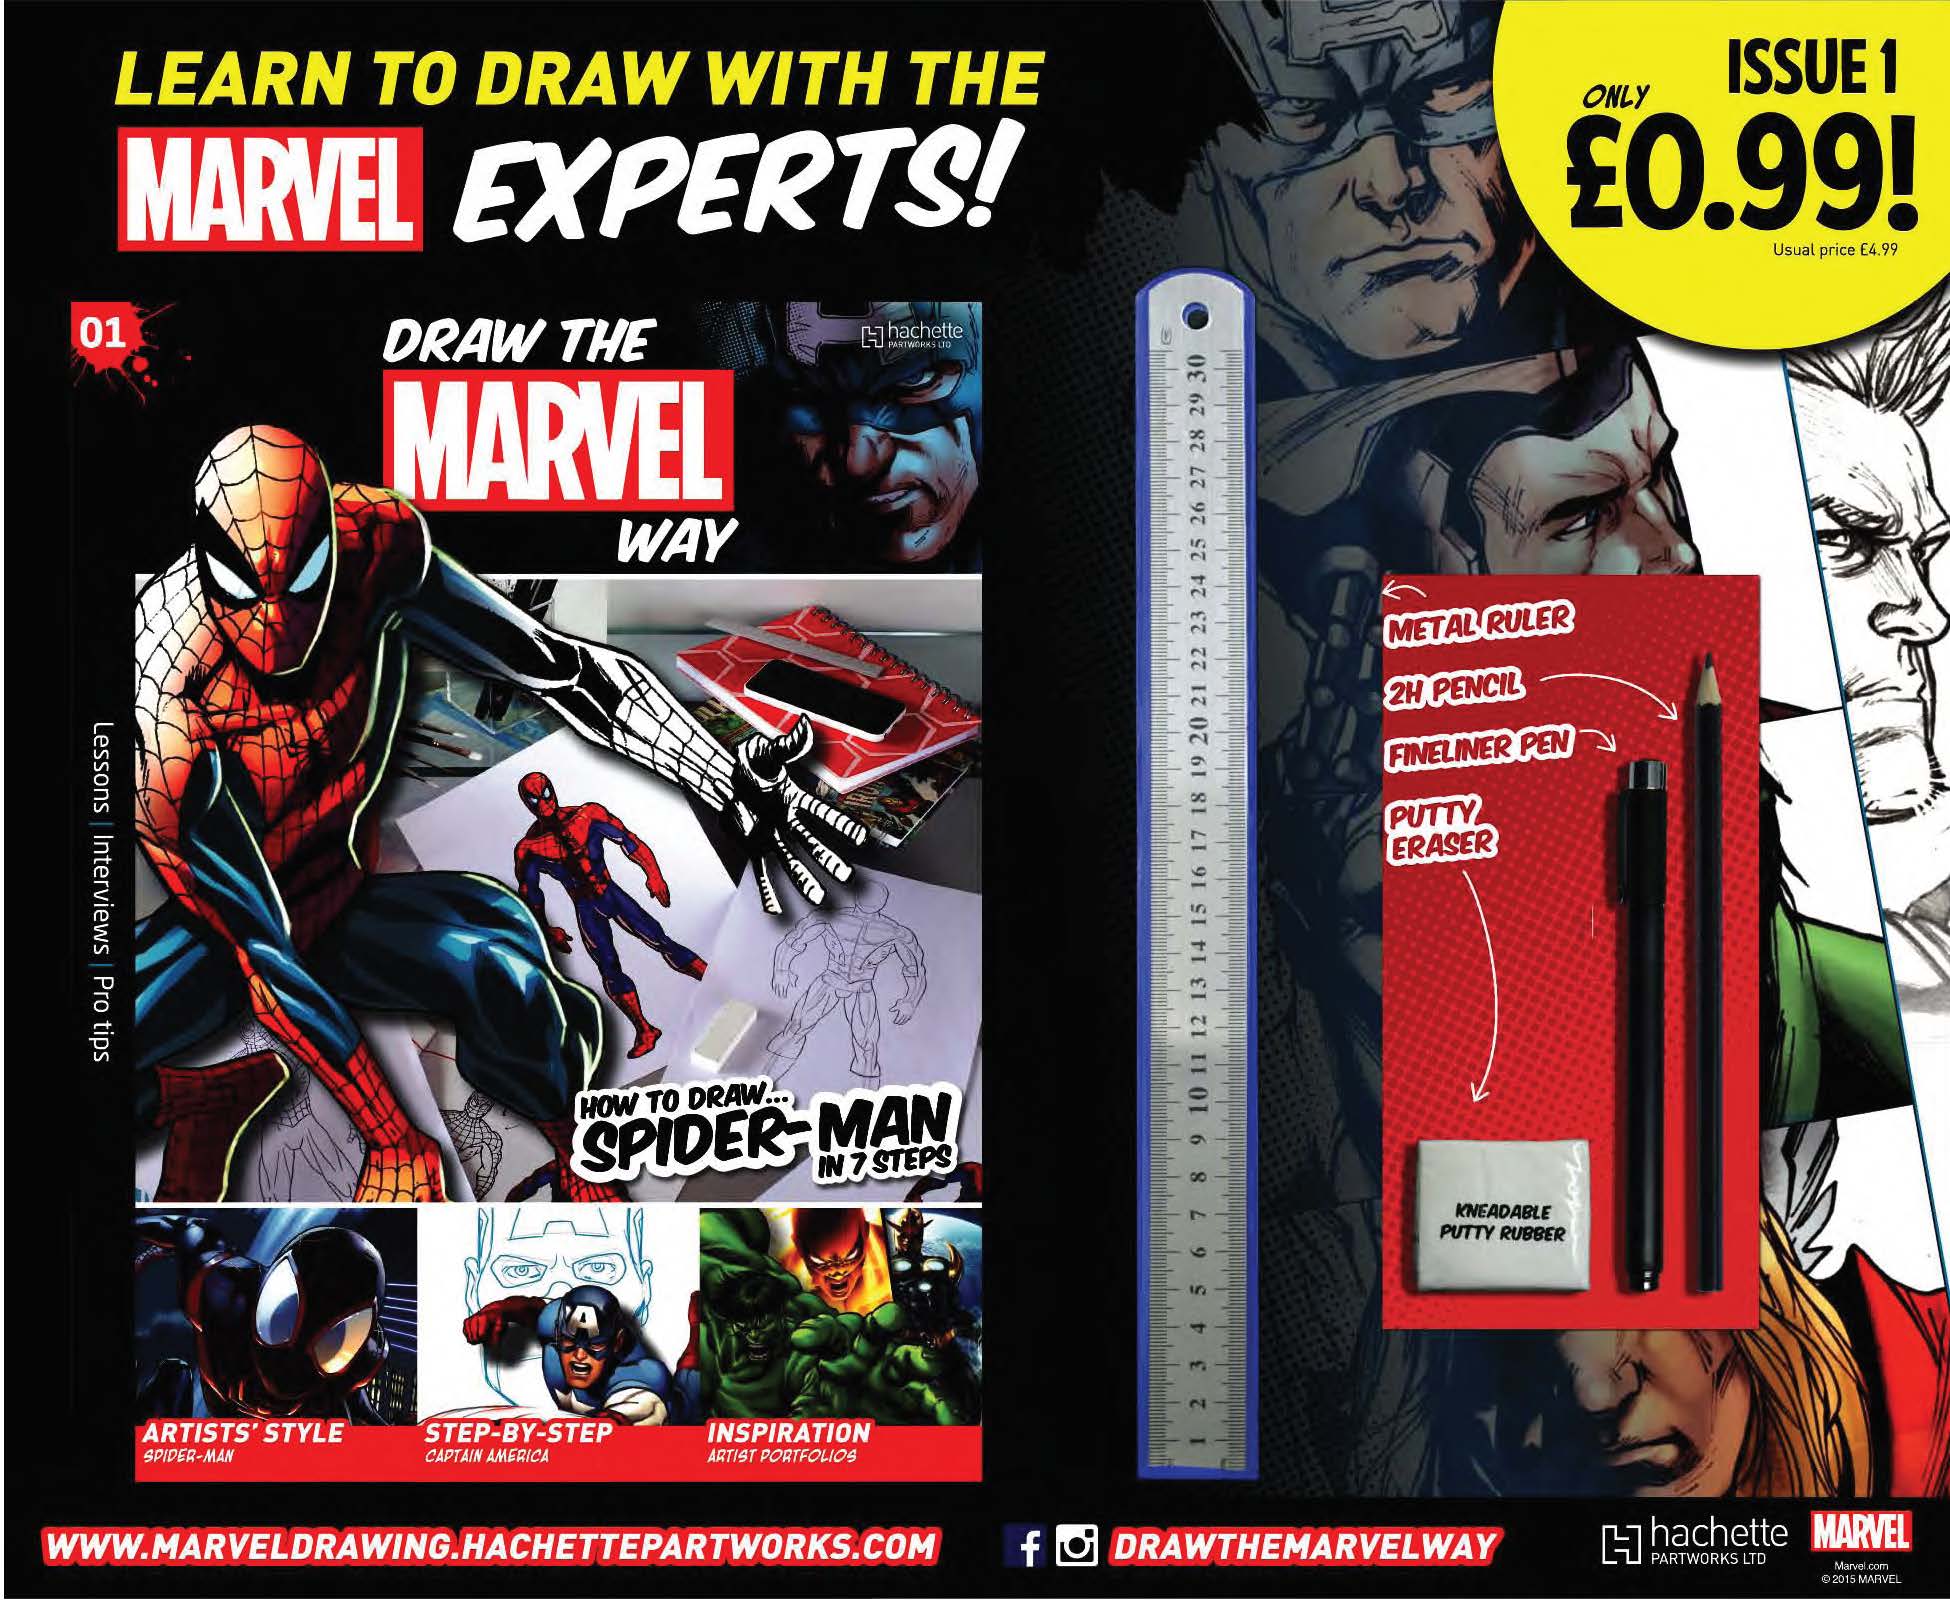 How To Draw The Marvel Way - Packshot